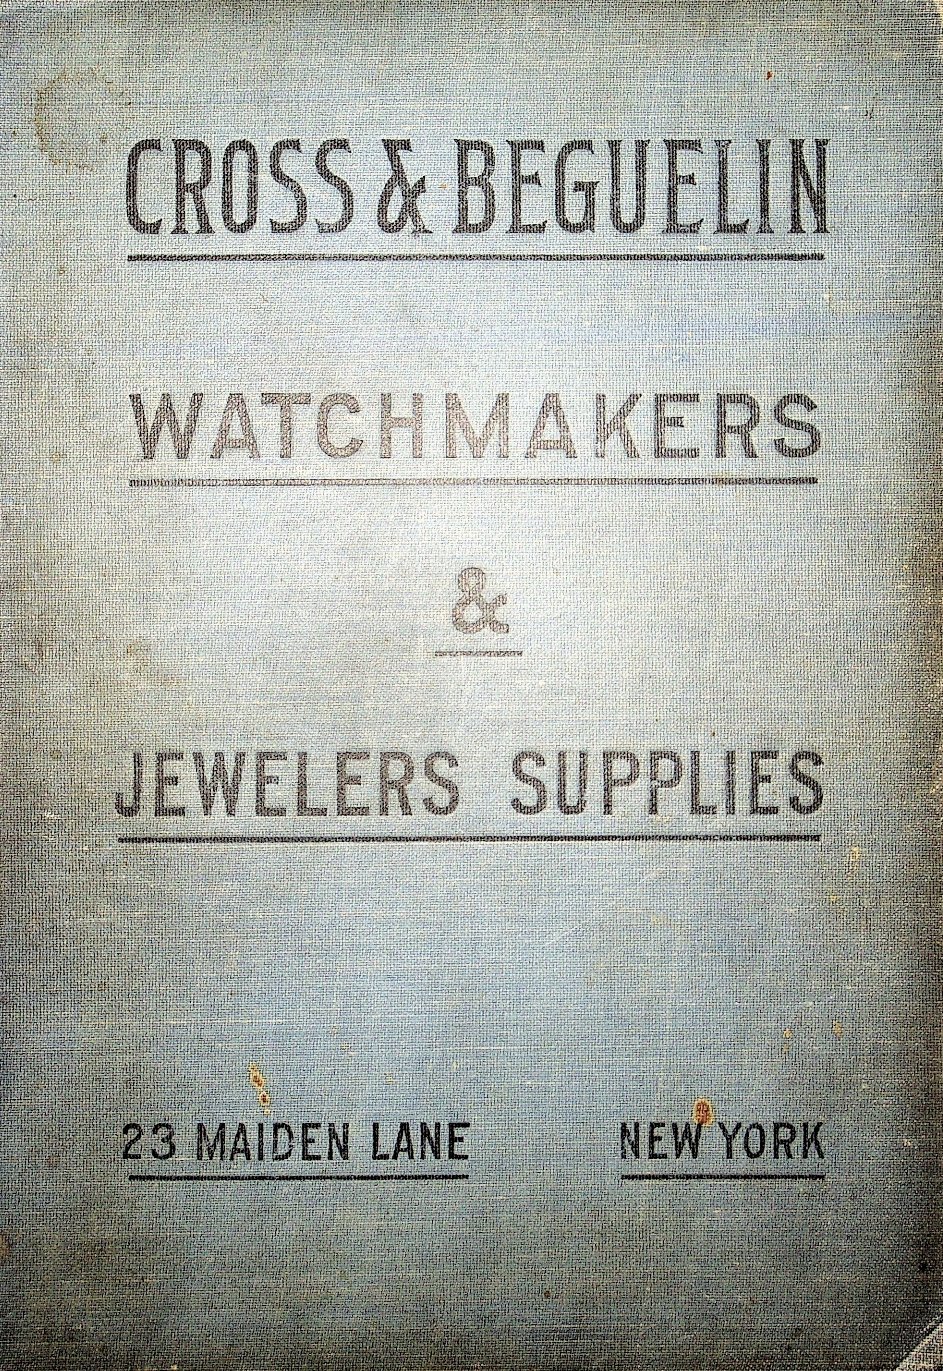 1910 Cross & Beguelin: Rockford Parts Material Catalog Cover Image